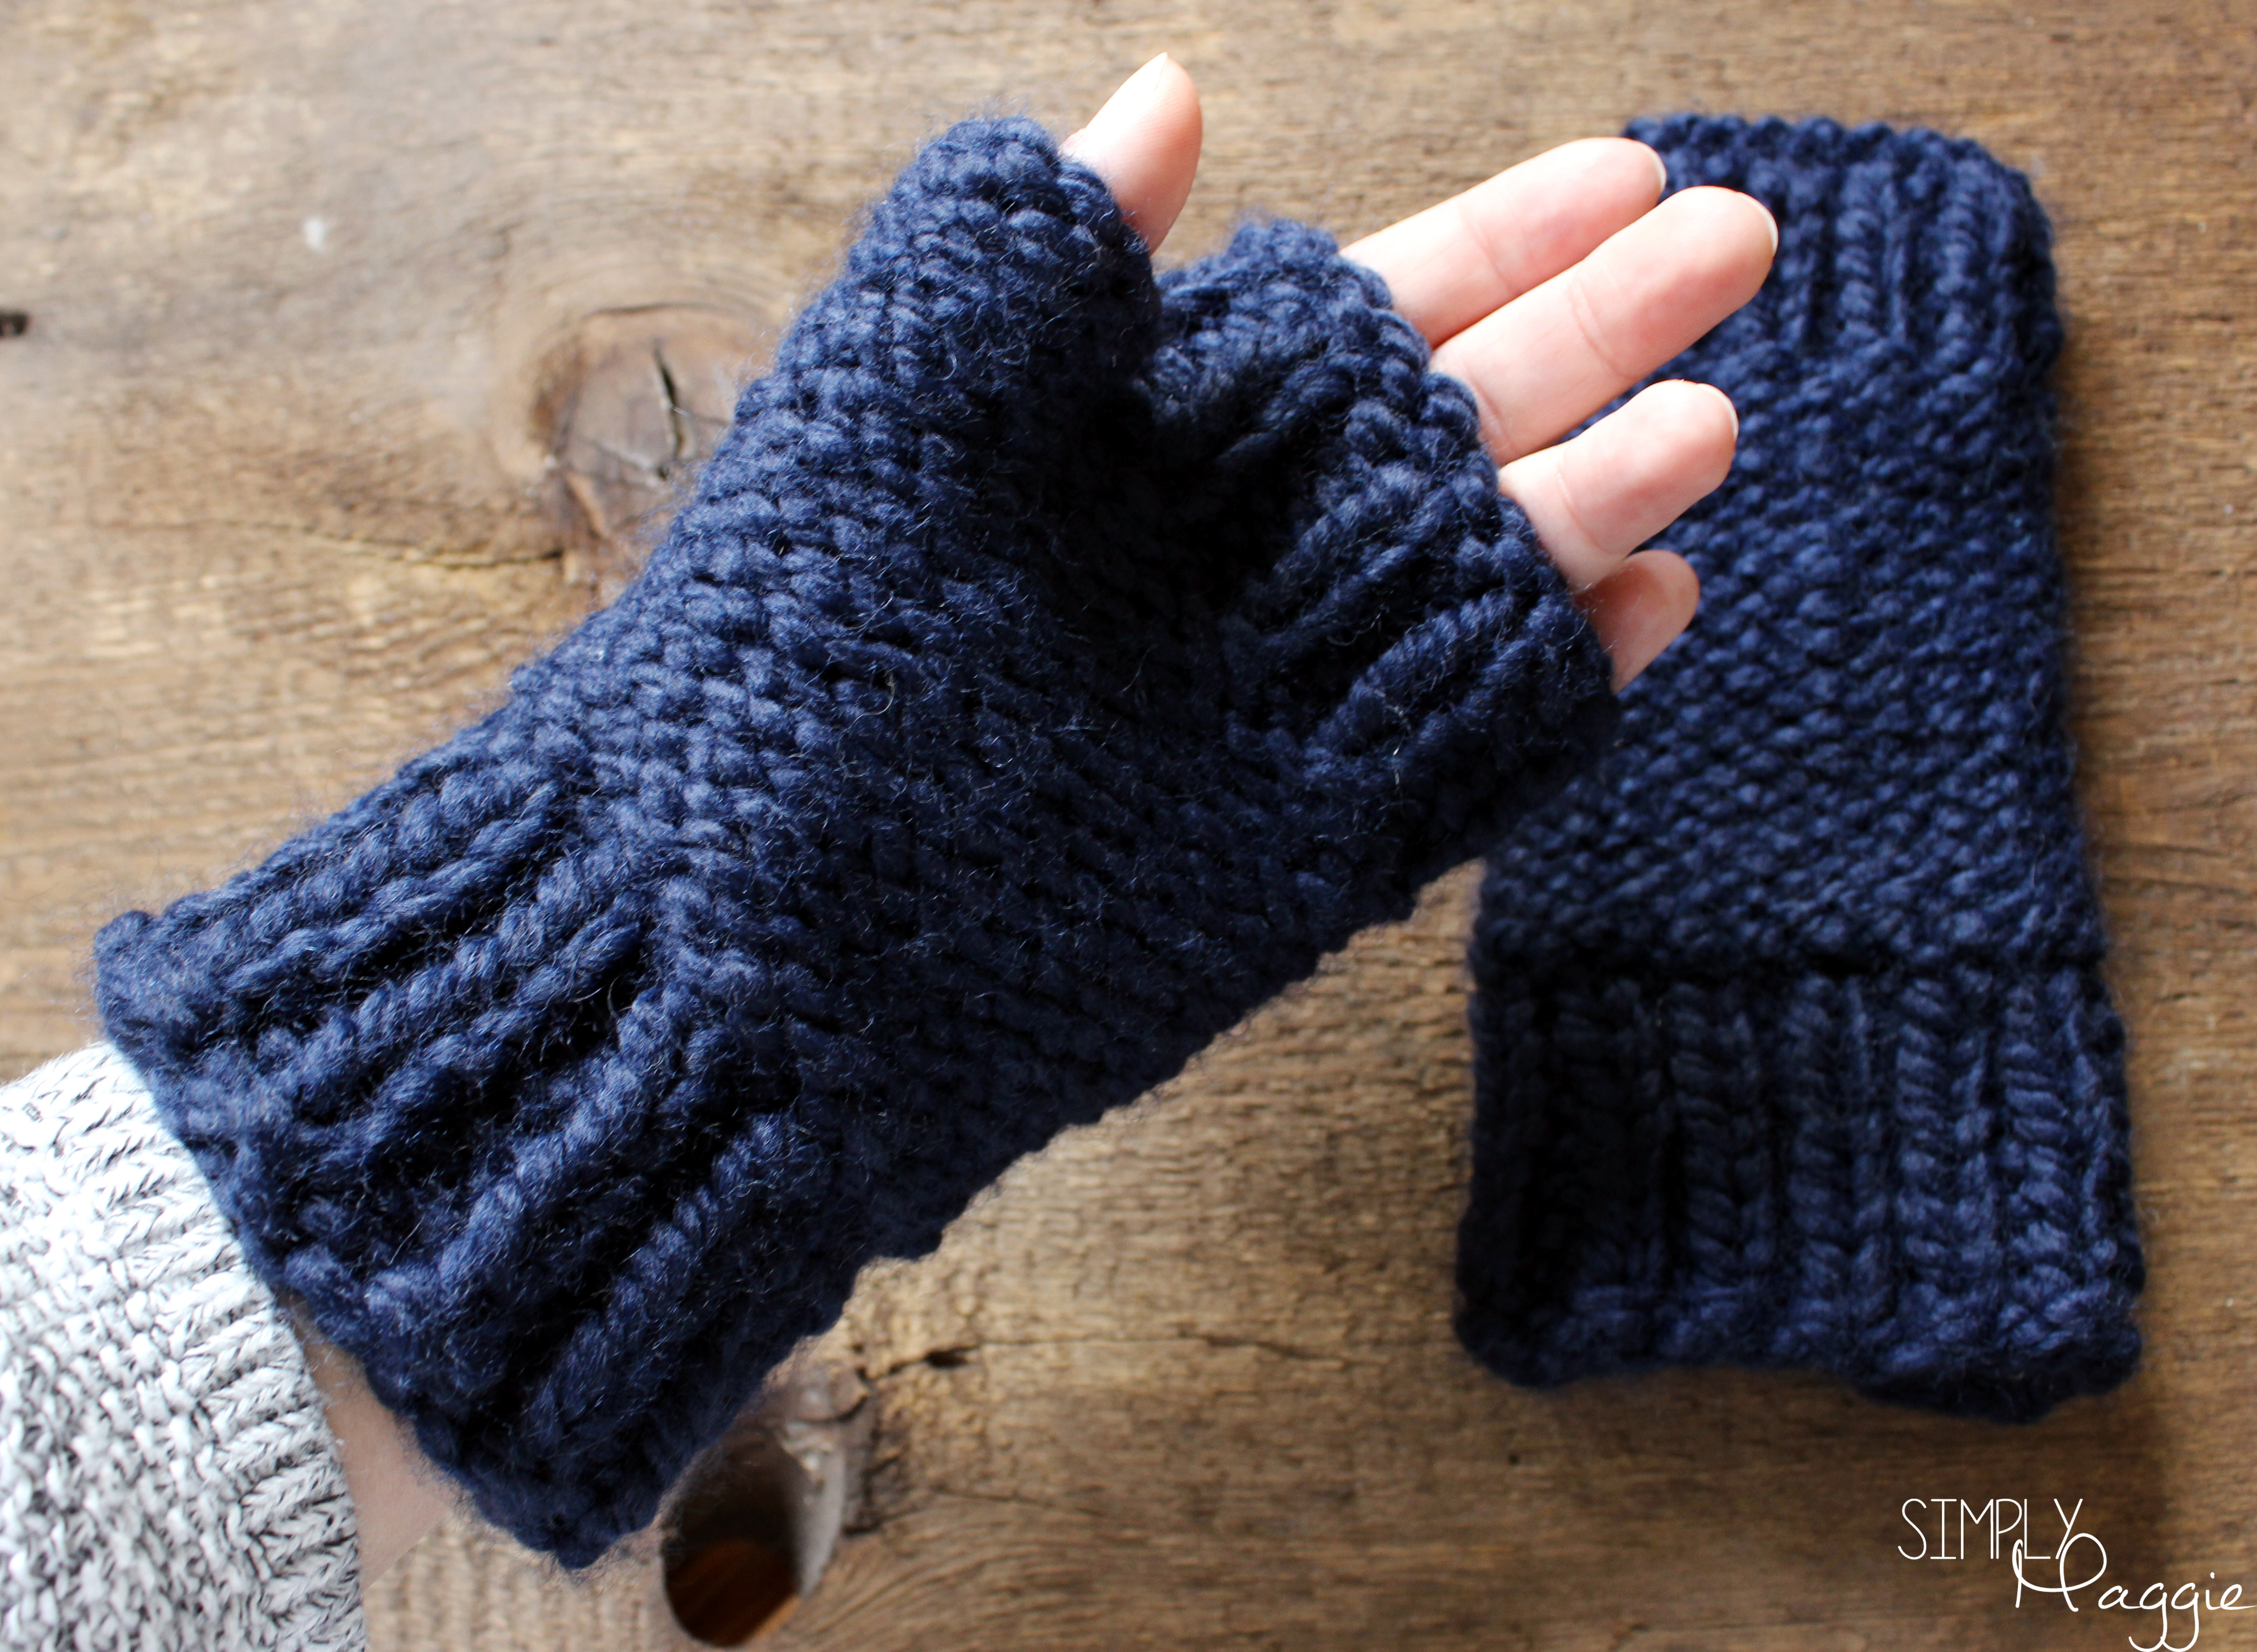 Chunky Fingerless Mittens Pattern | SimplyMaggie.com